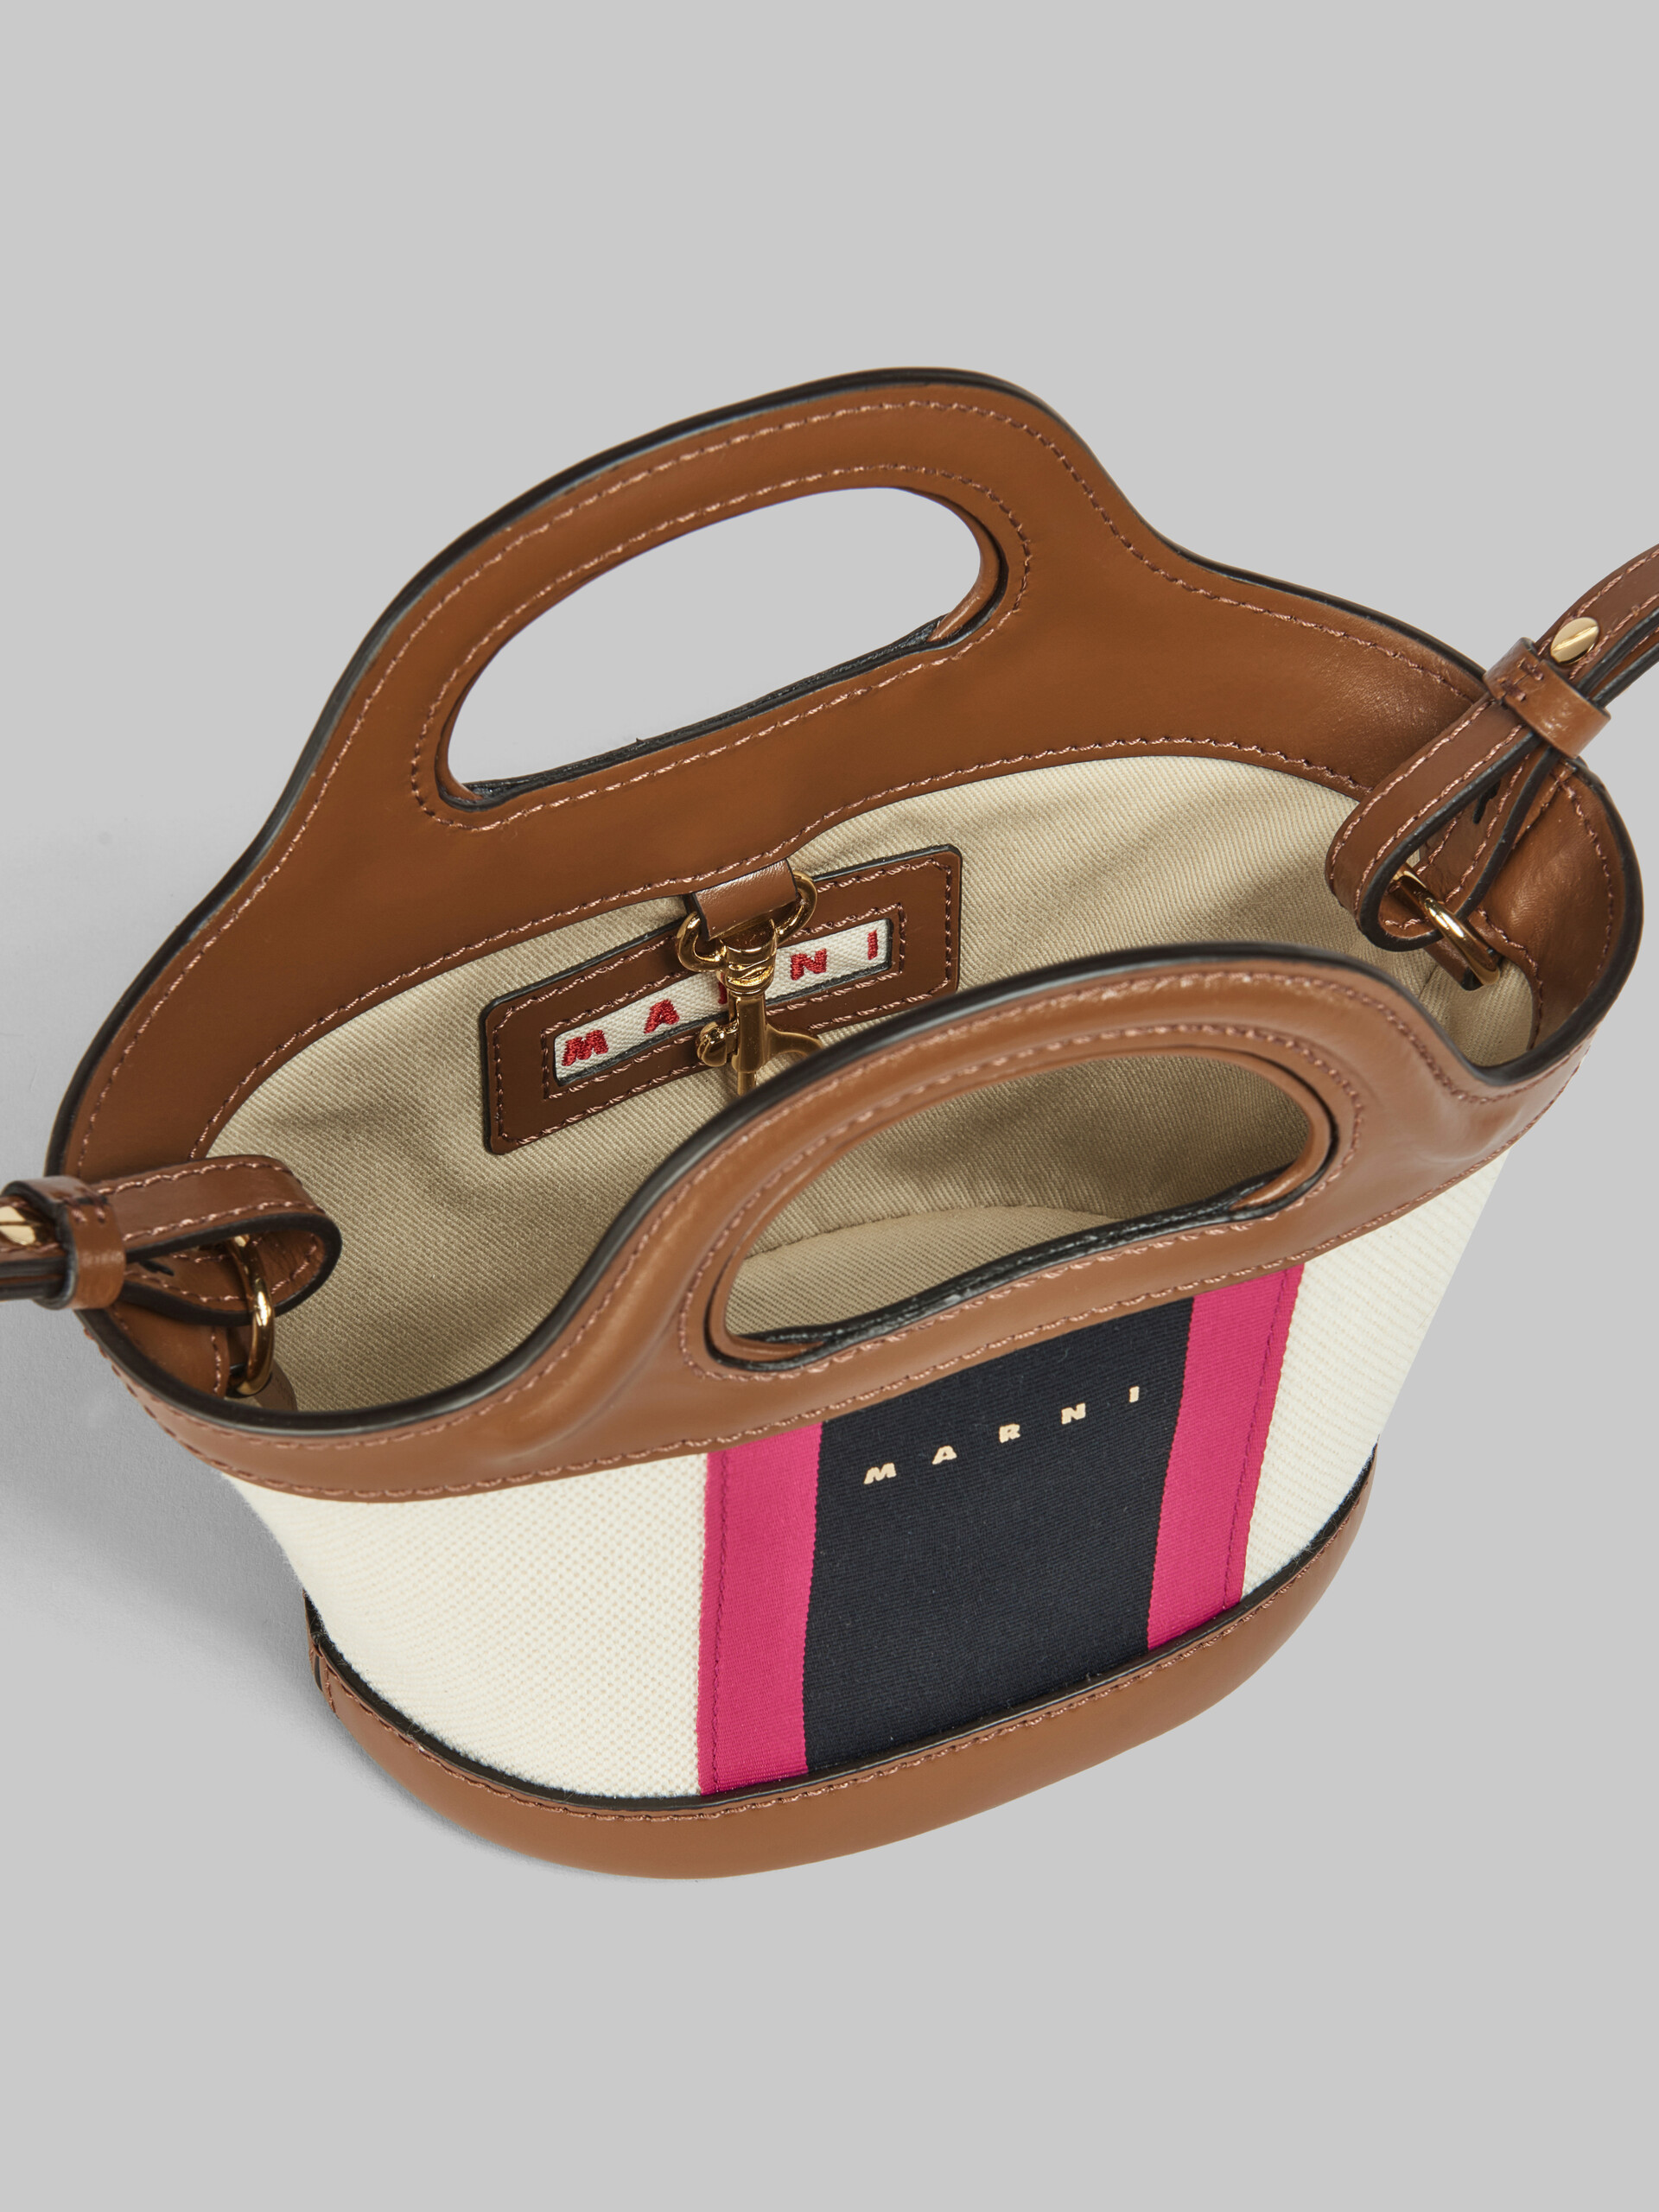 Tropicalia Micro Bag in Brown leather and striped canvas - Handbag - Image 4